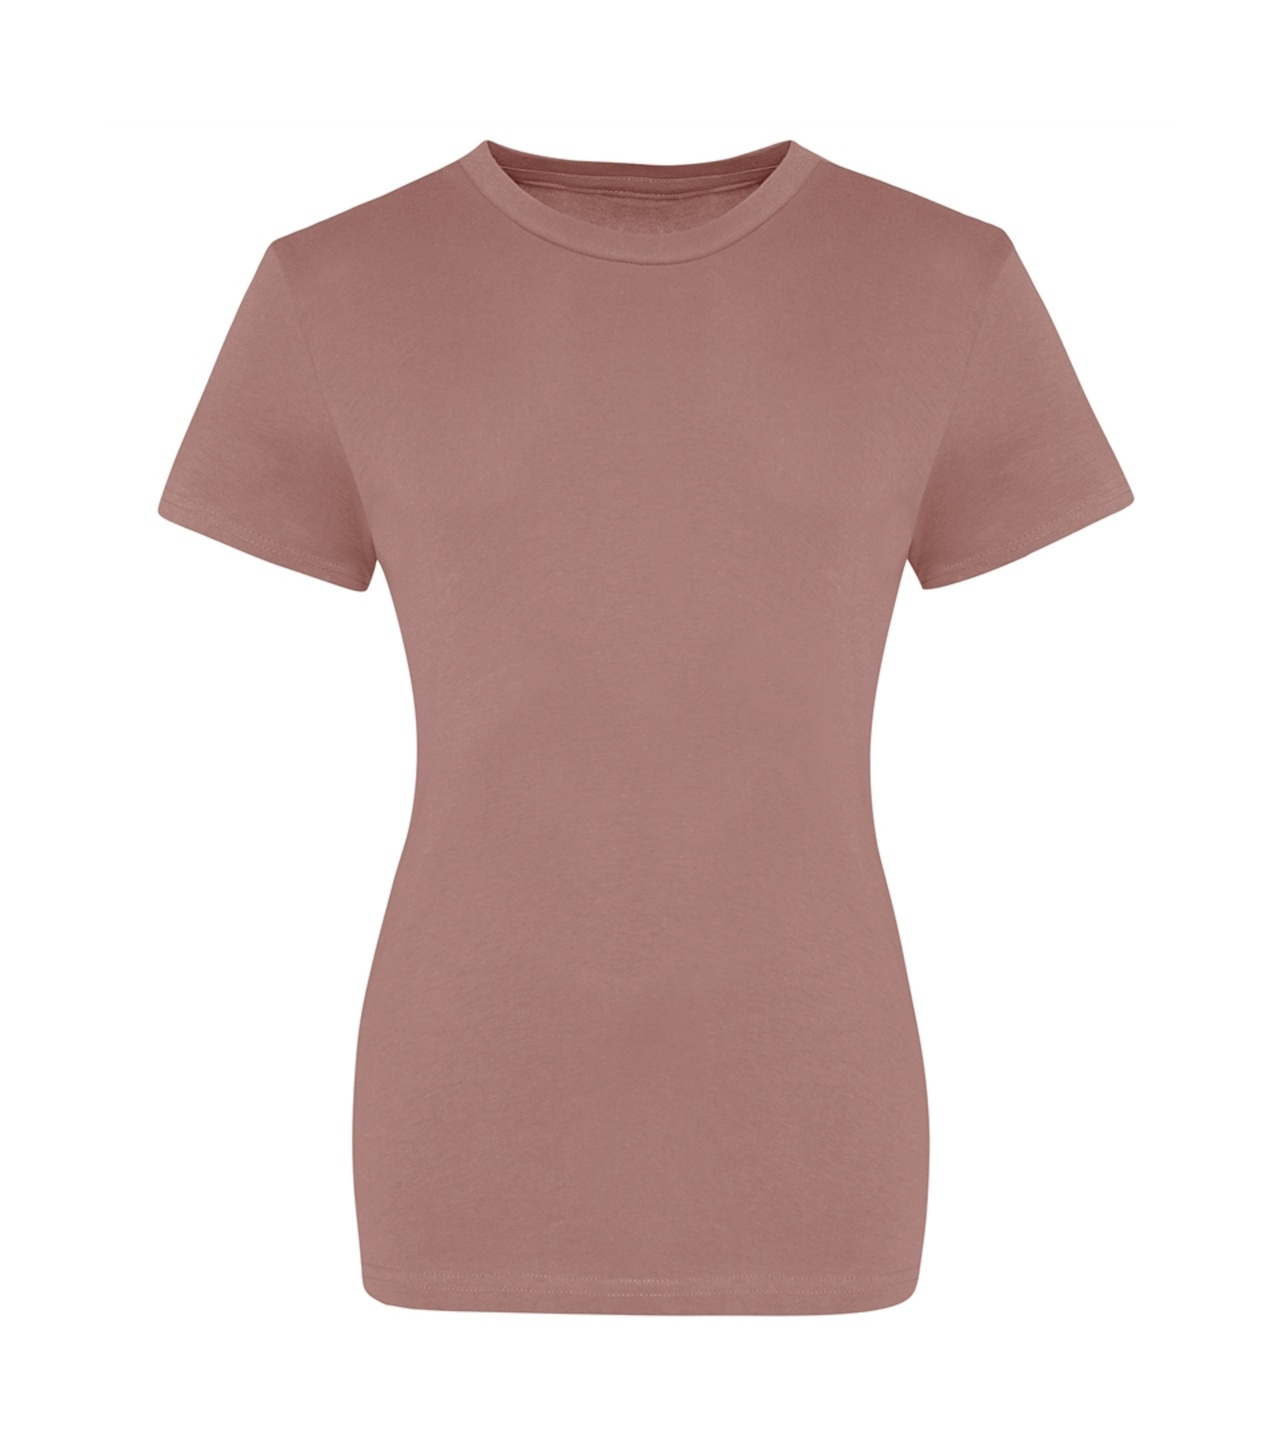 Just Ts The 100 Women's T - Dusty Pink - L